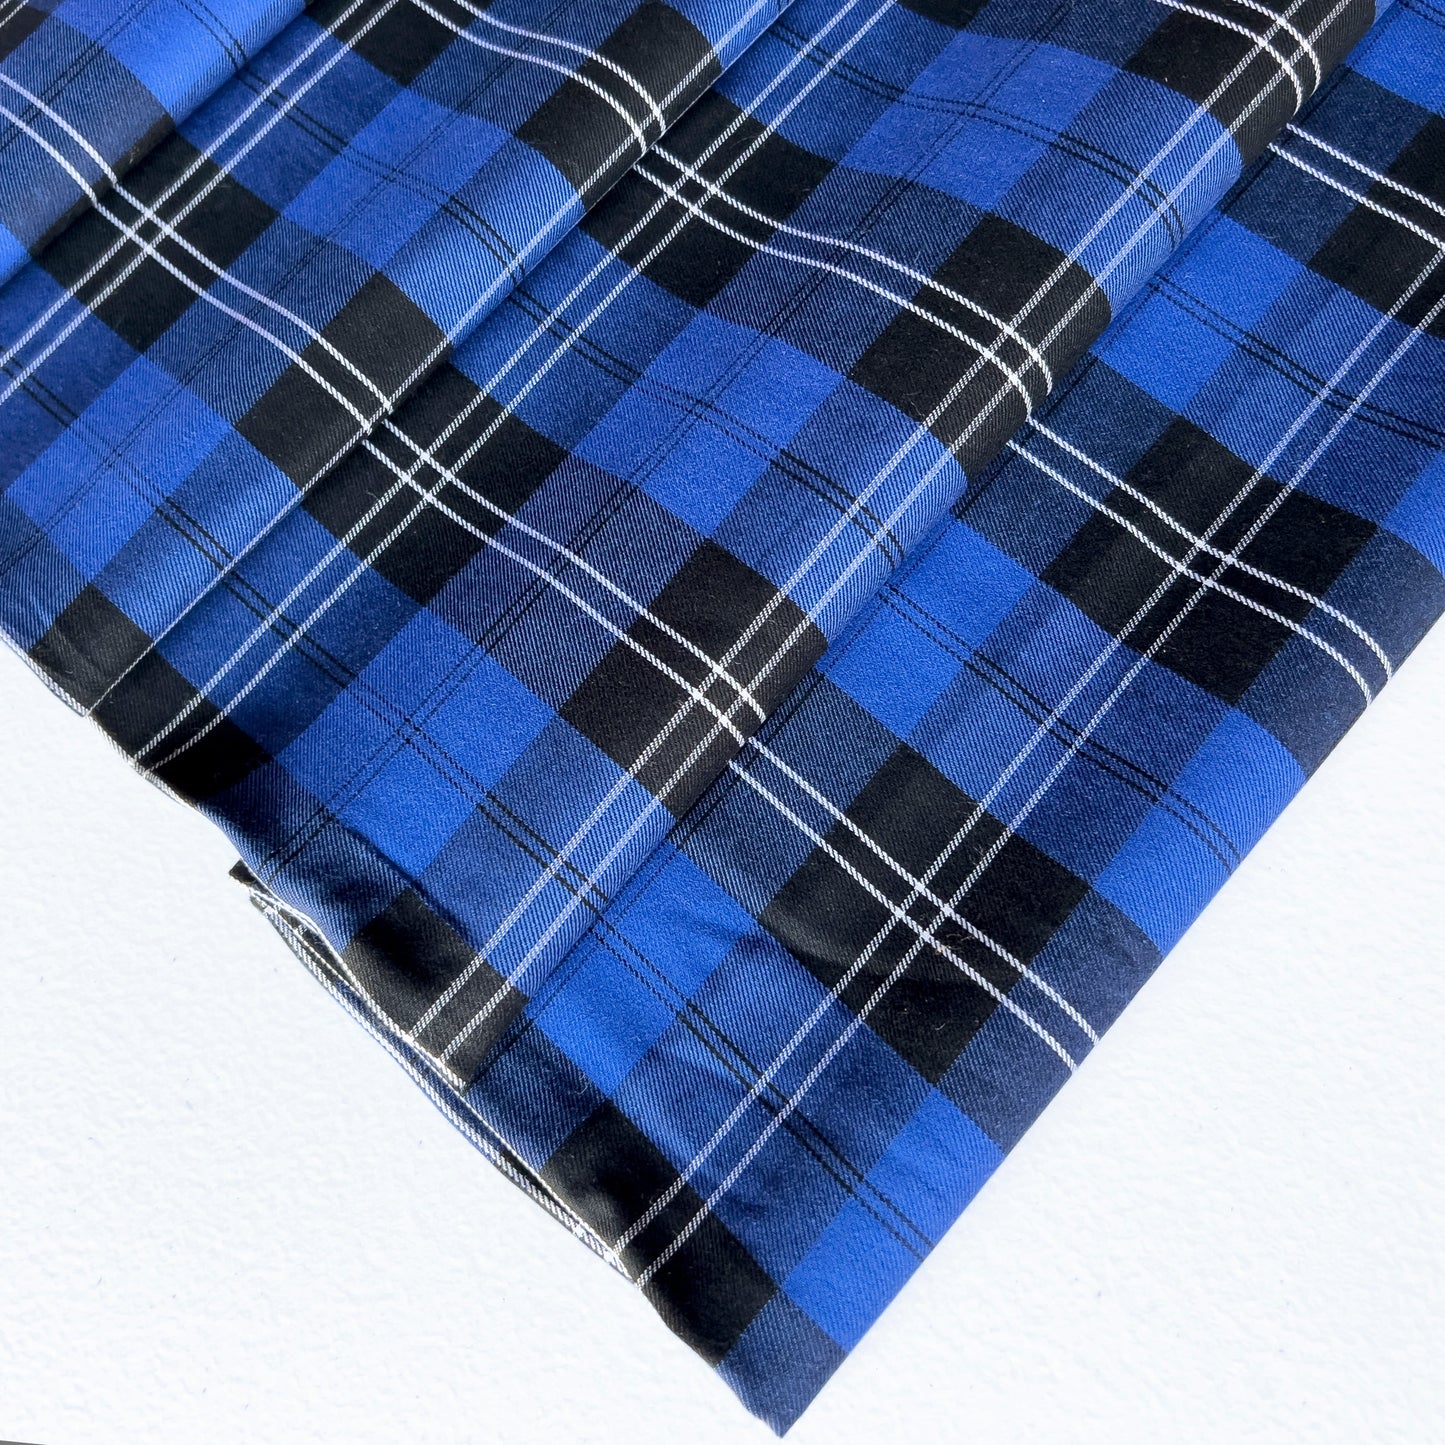 Remnant: House of Wales Plaid in Cobalt - 1 1/4 yards